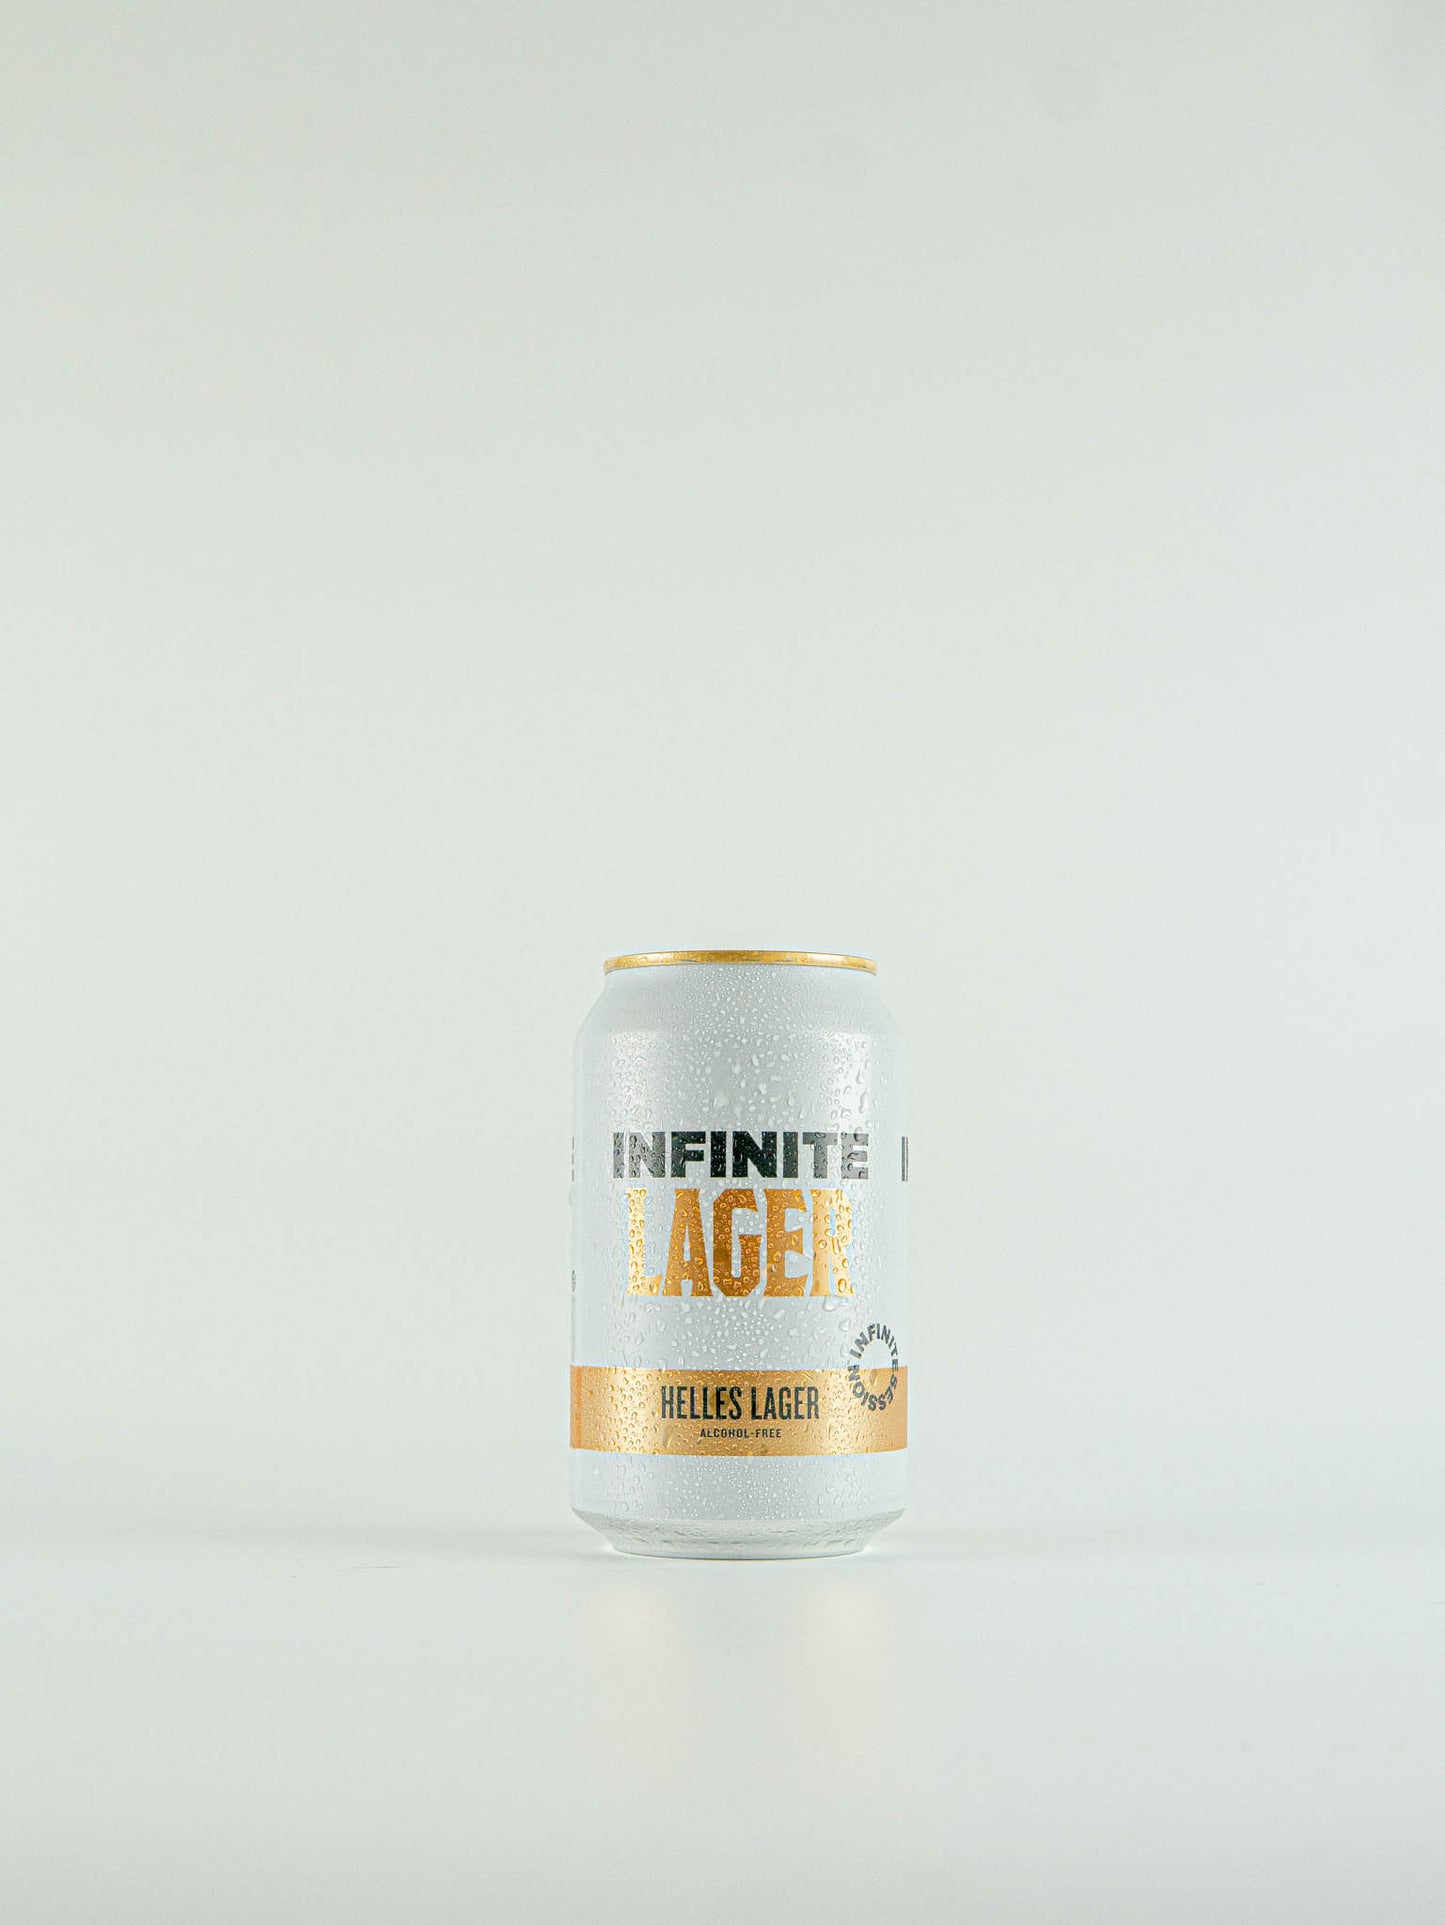 Infinite Session Helles Lager Alcohol Free 0.5% - 330ml